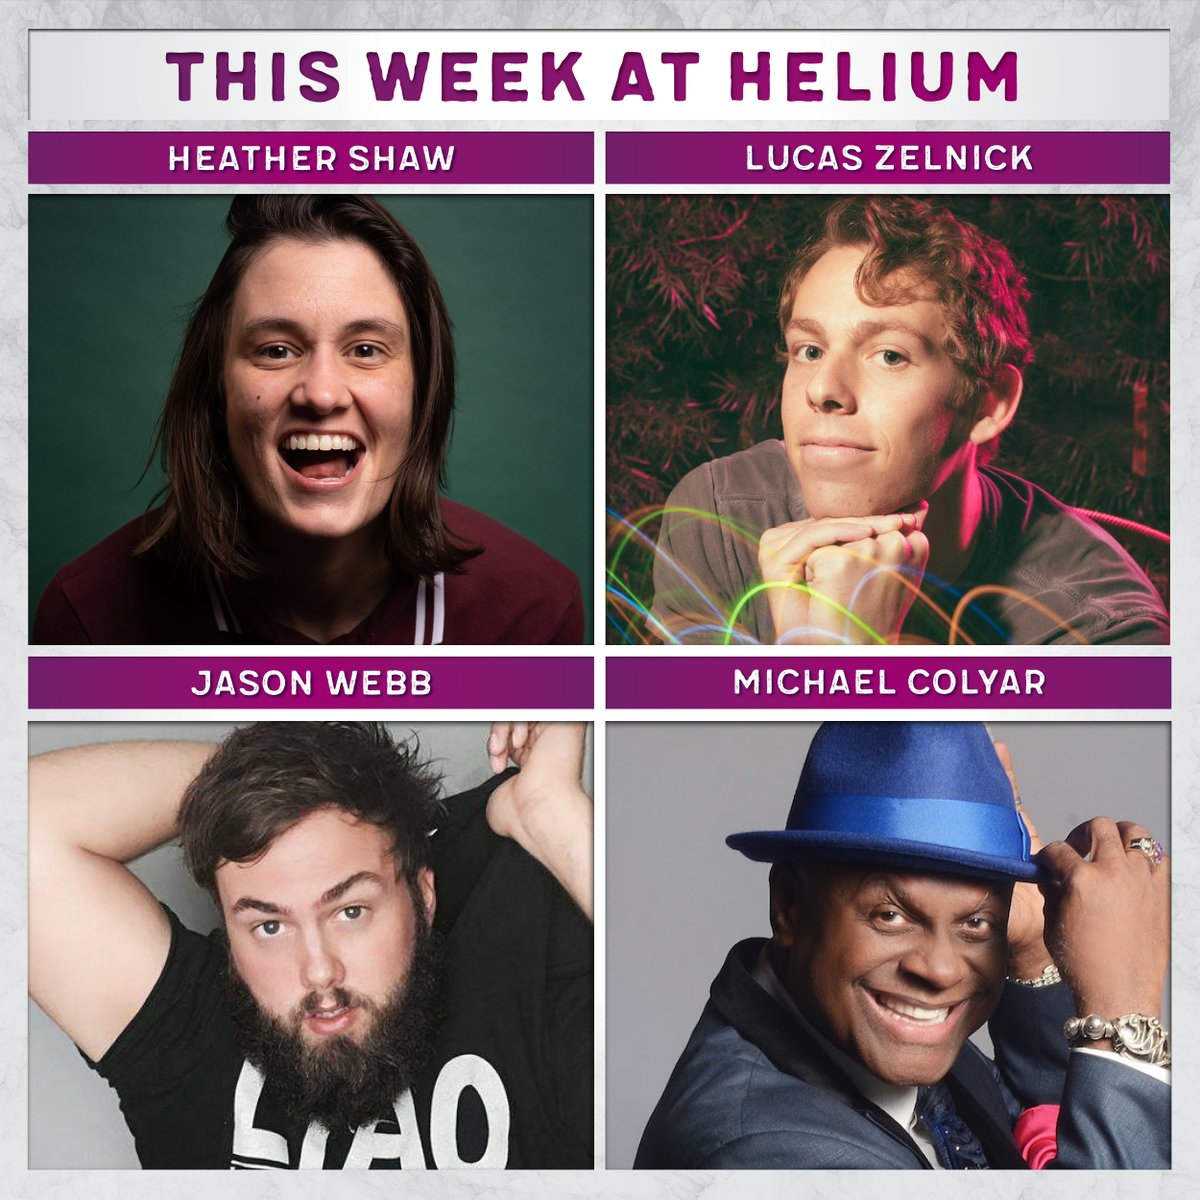 This Week at Helium | Heather Shaw, Lucas Zelnick, Jason Webb will be Upstairs, + @MichaelColyar headlines this weekend! Grab tickets now: bit.ly/3QzPDCy